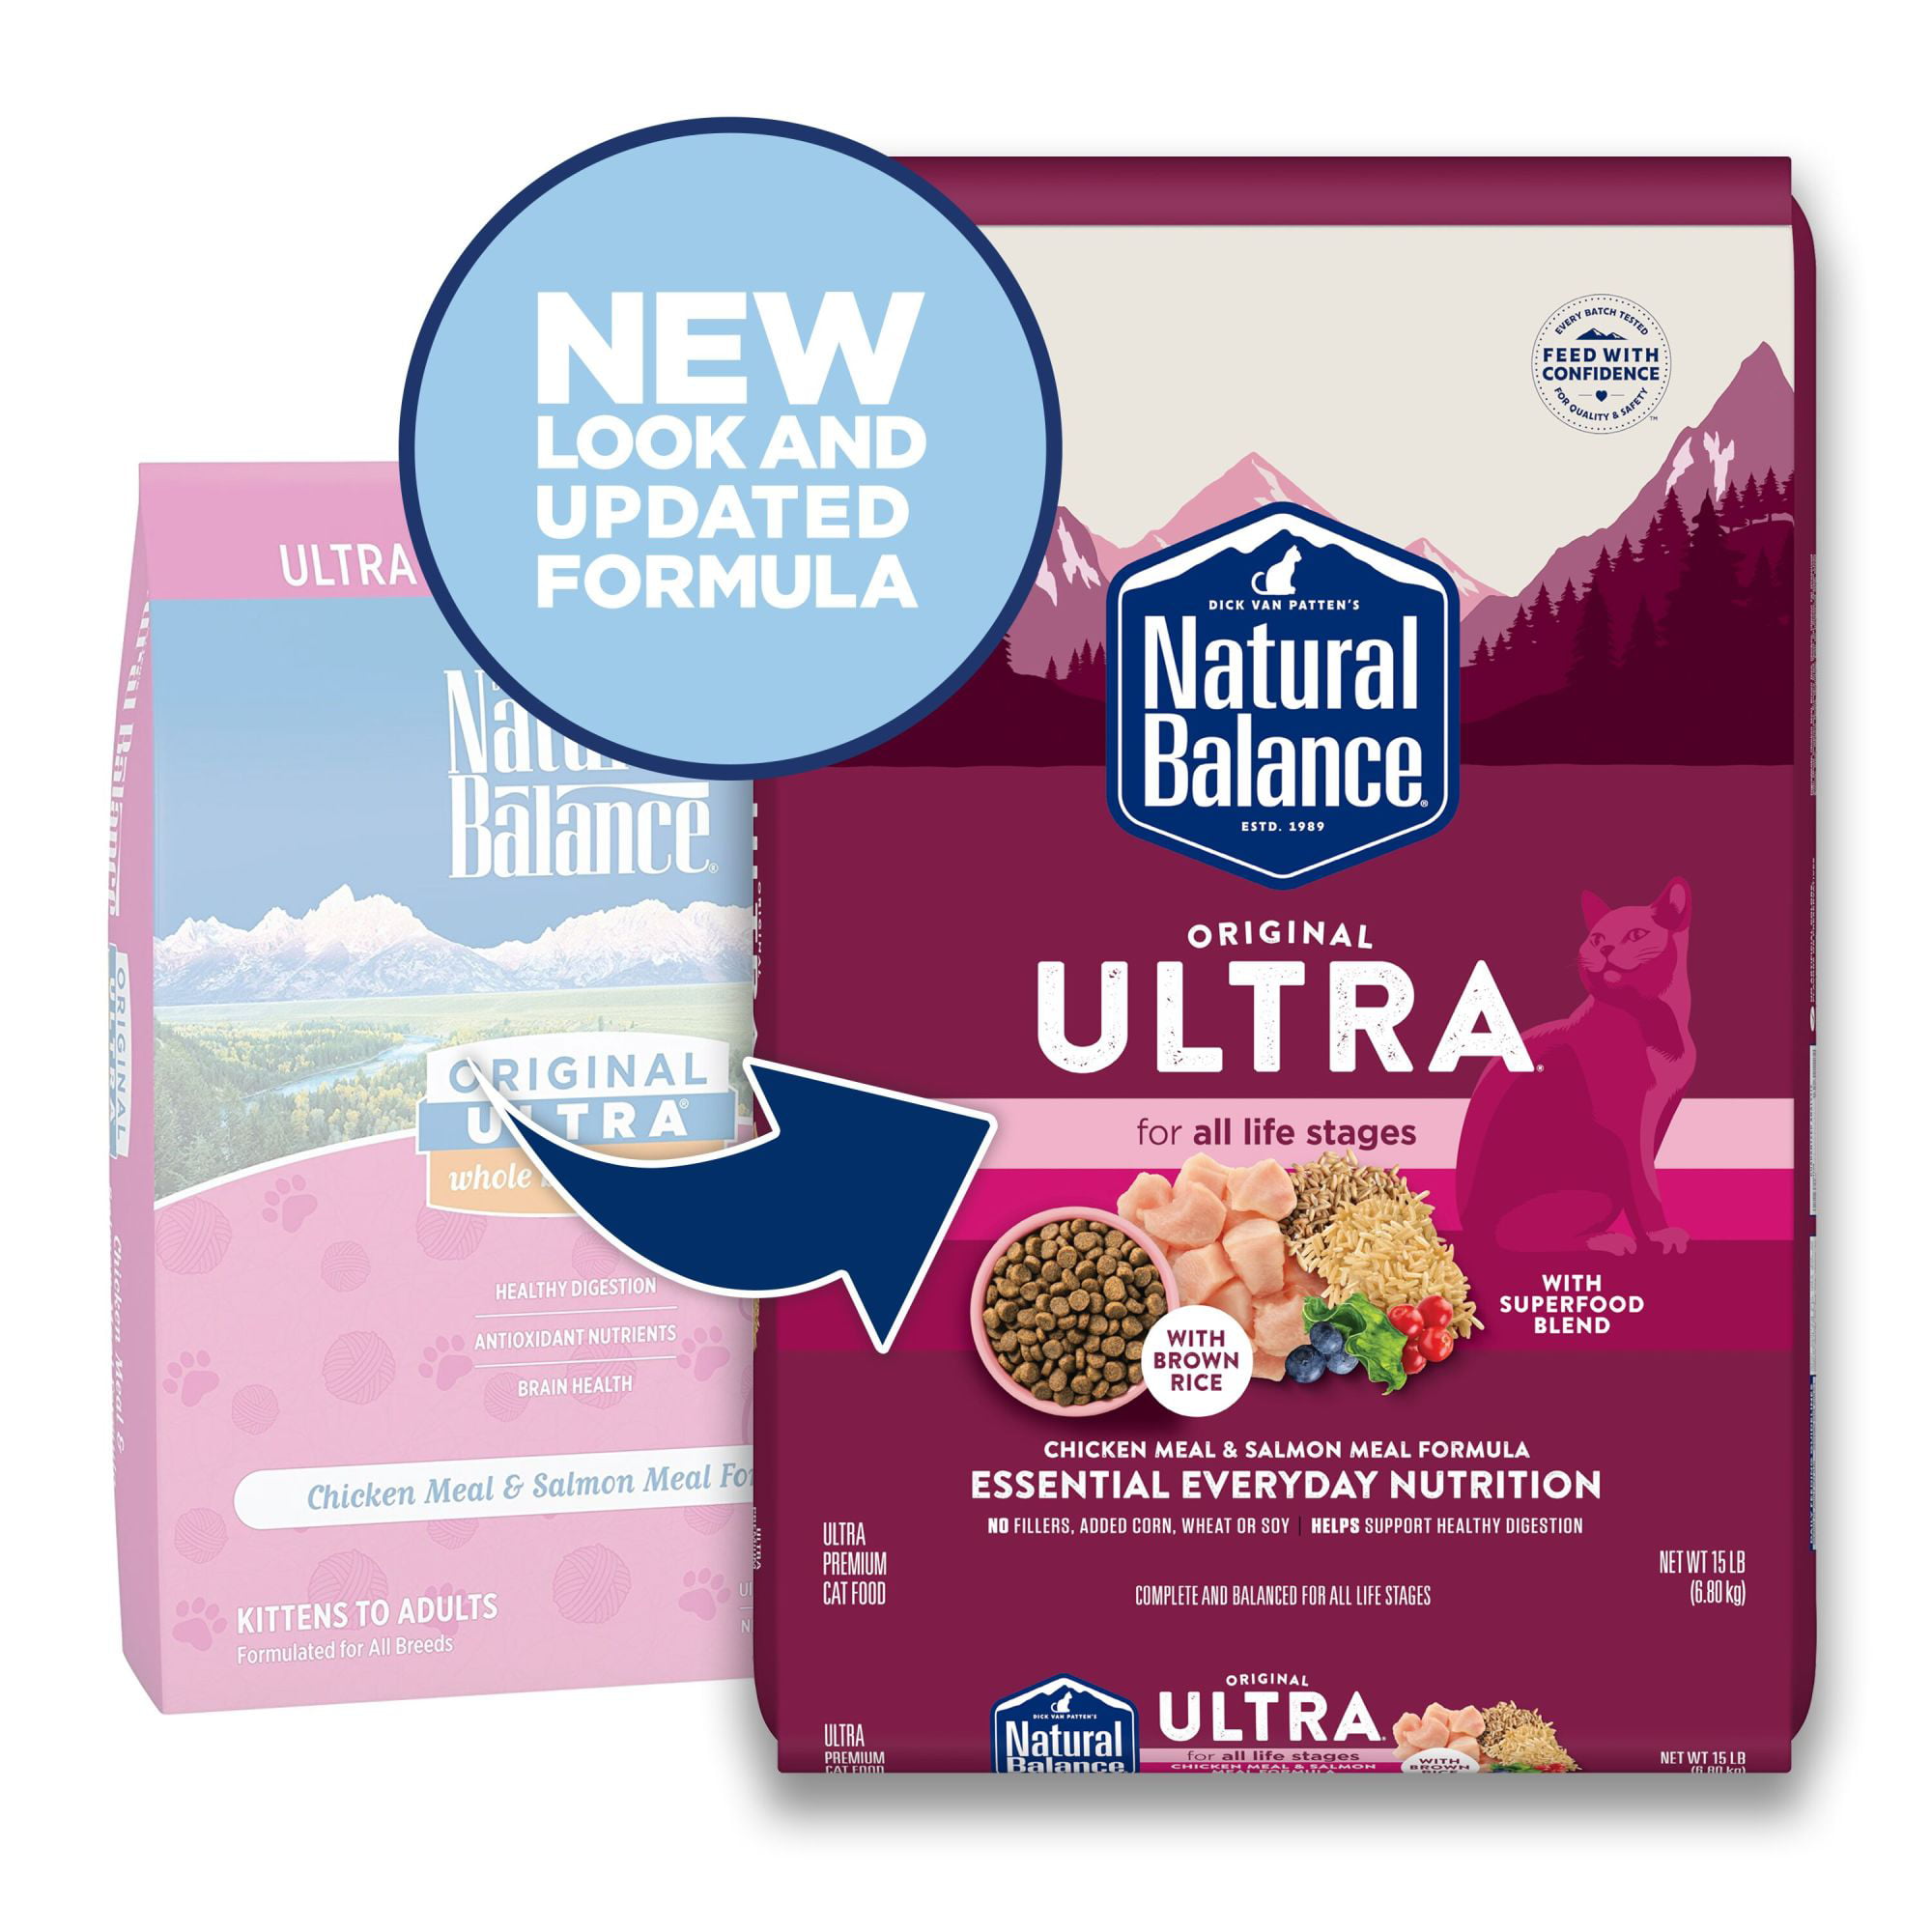 Chicken Meal & Salmon Meal Natural Balance Original Ultra Whole Body Health Dry Cat Food 